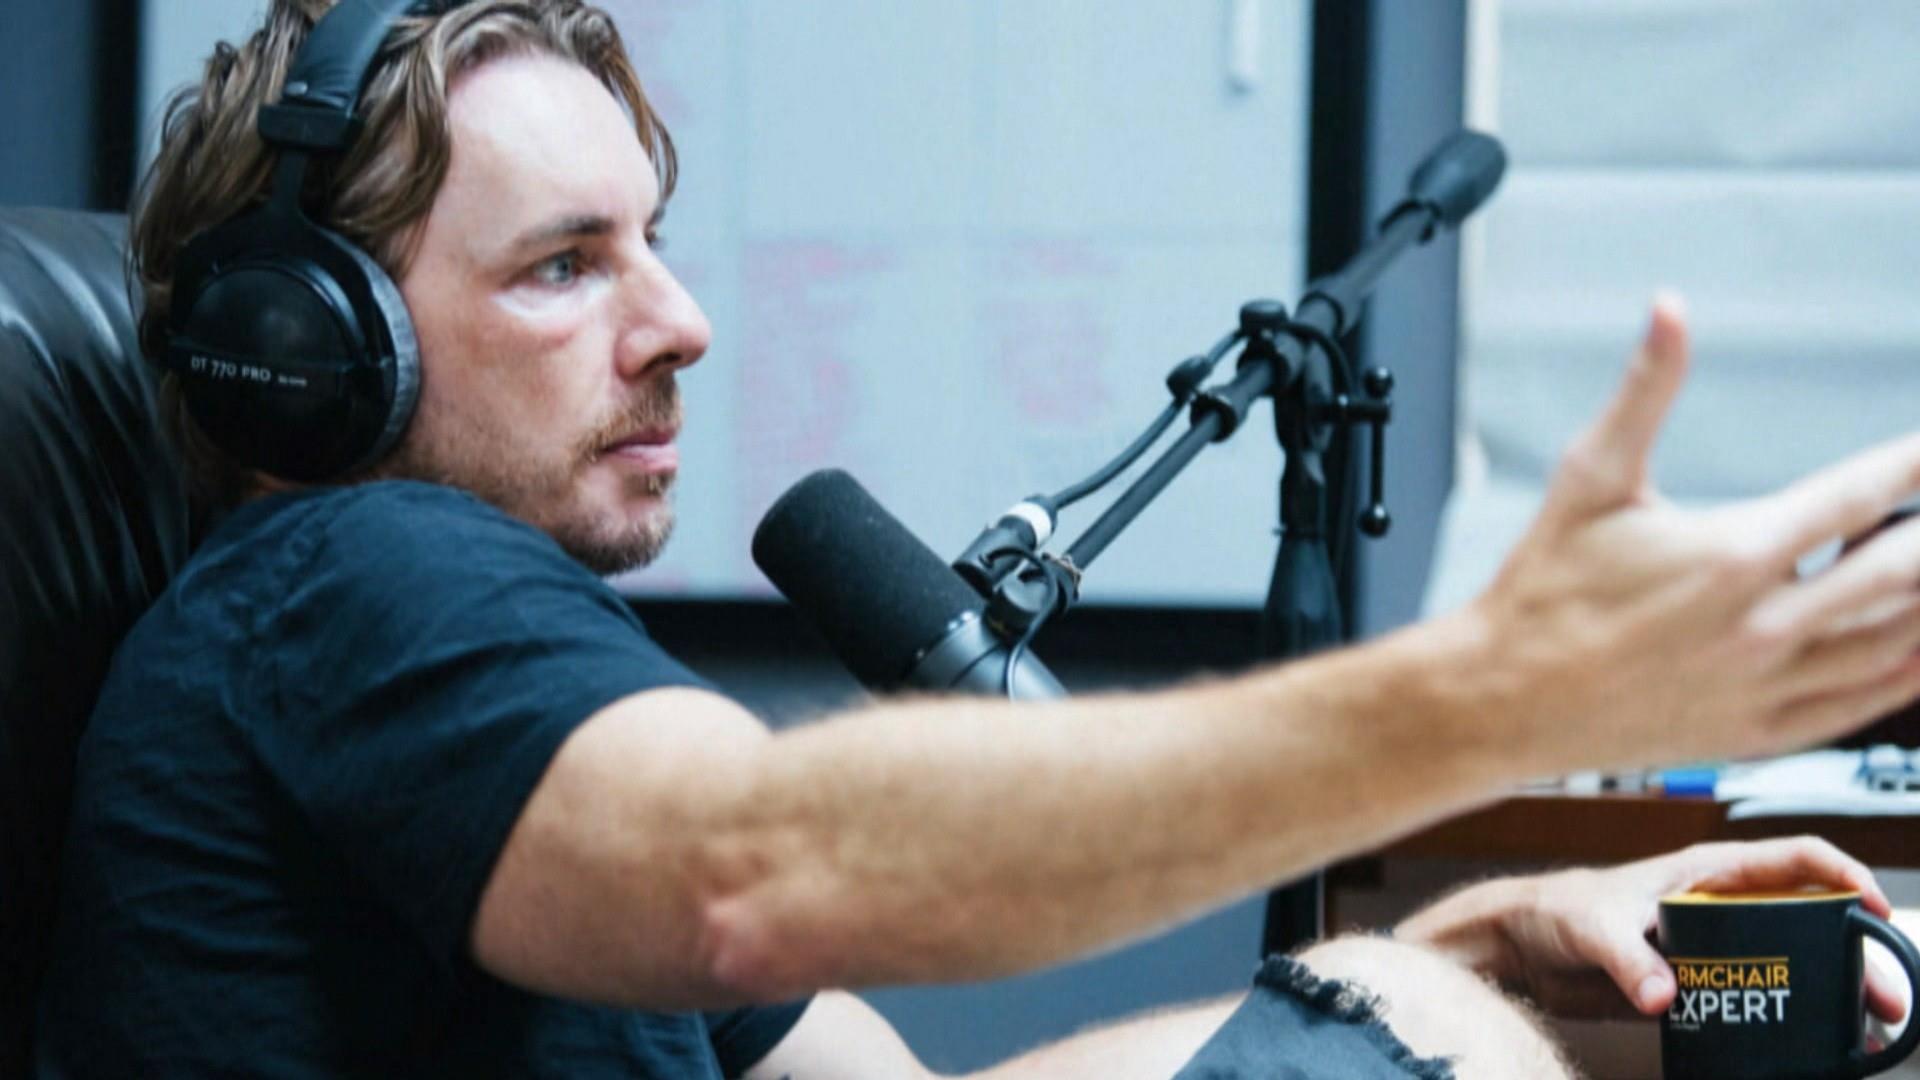 Dax Shepard Takes Us Behind The Scenes Of His Armchair Expert Podcast